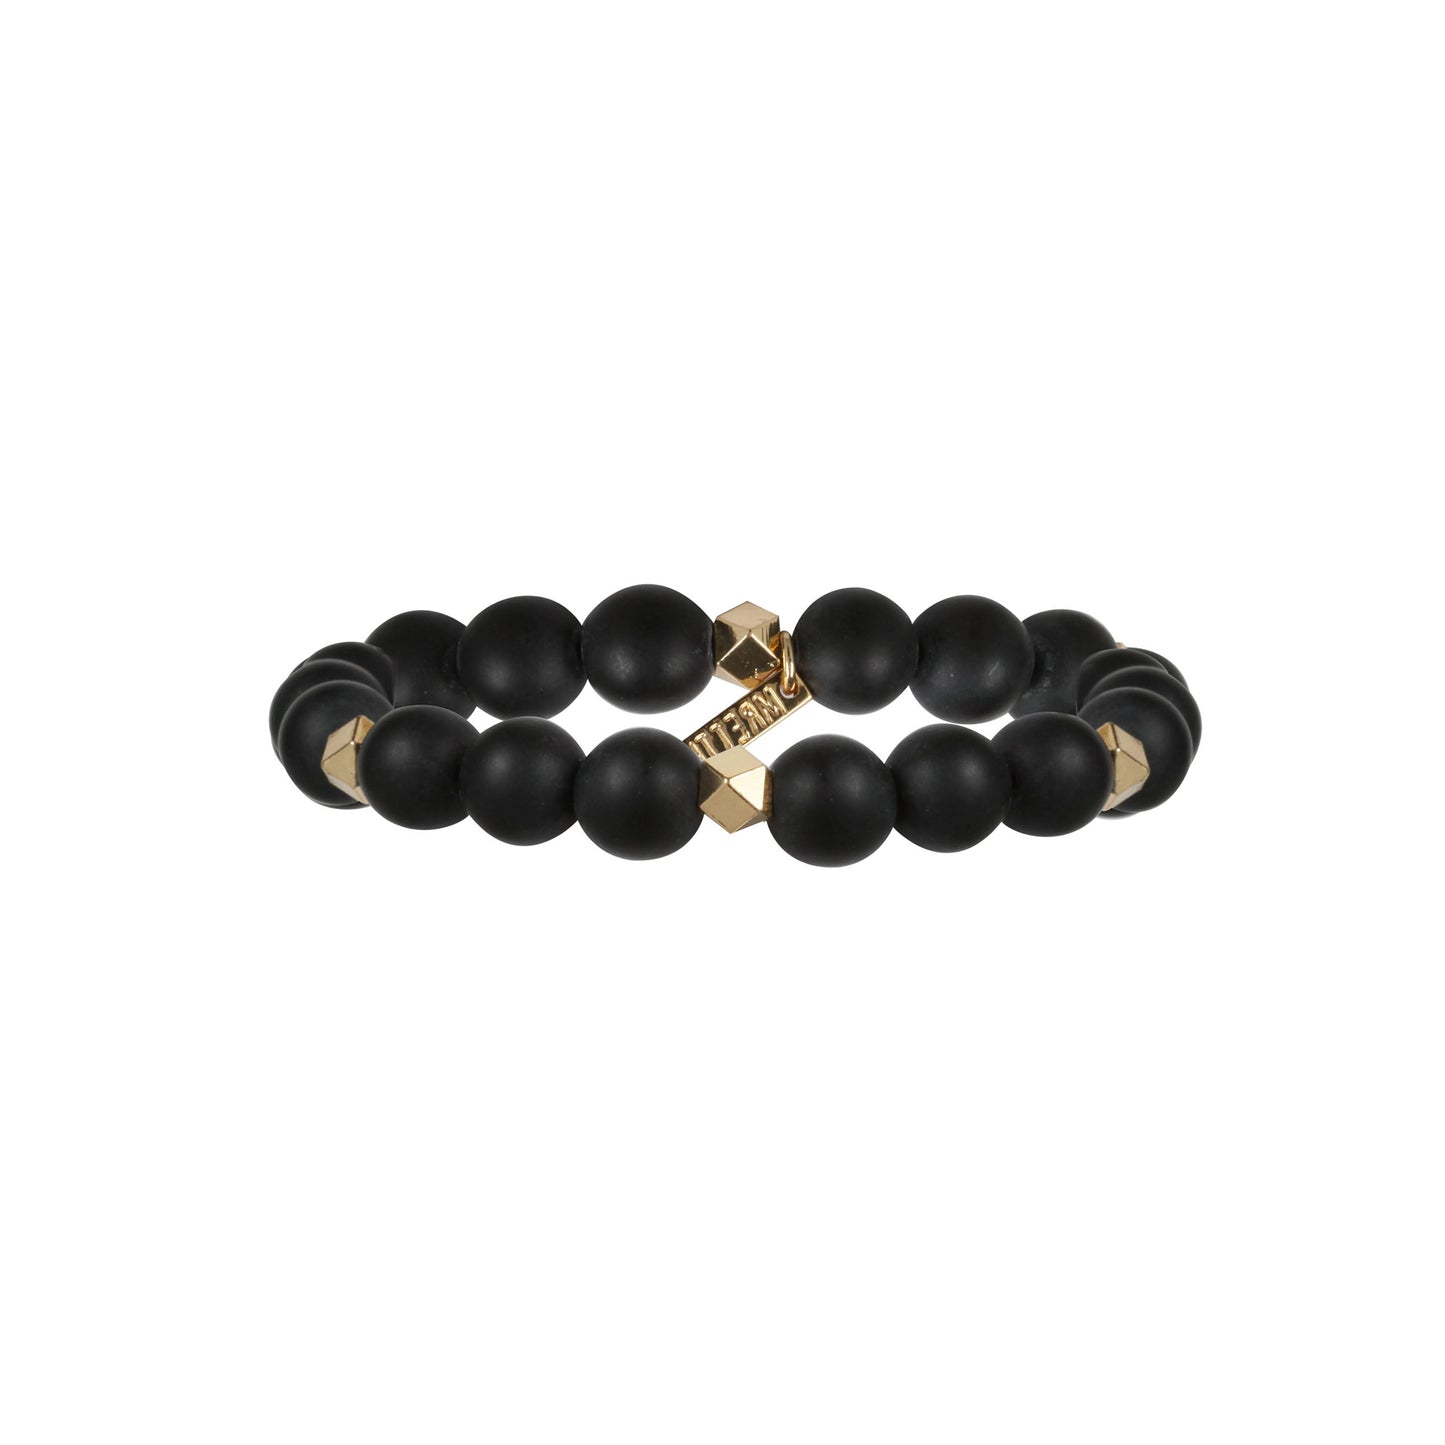 Mens Black Agate Bead Bracelet with Brass Faceted Beads